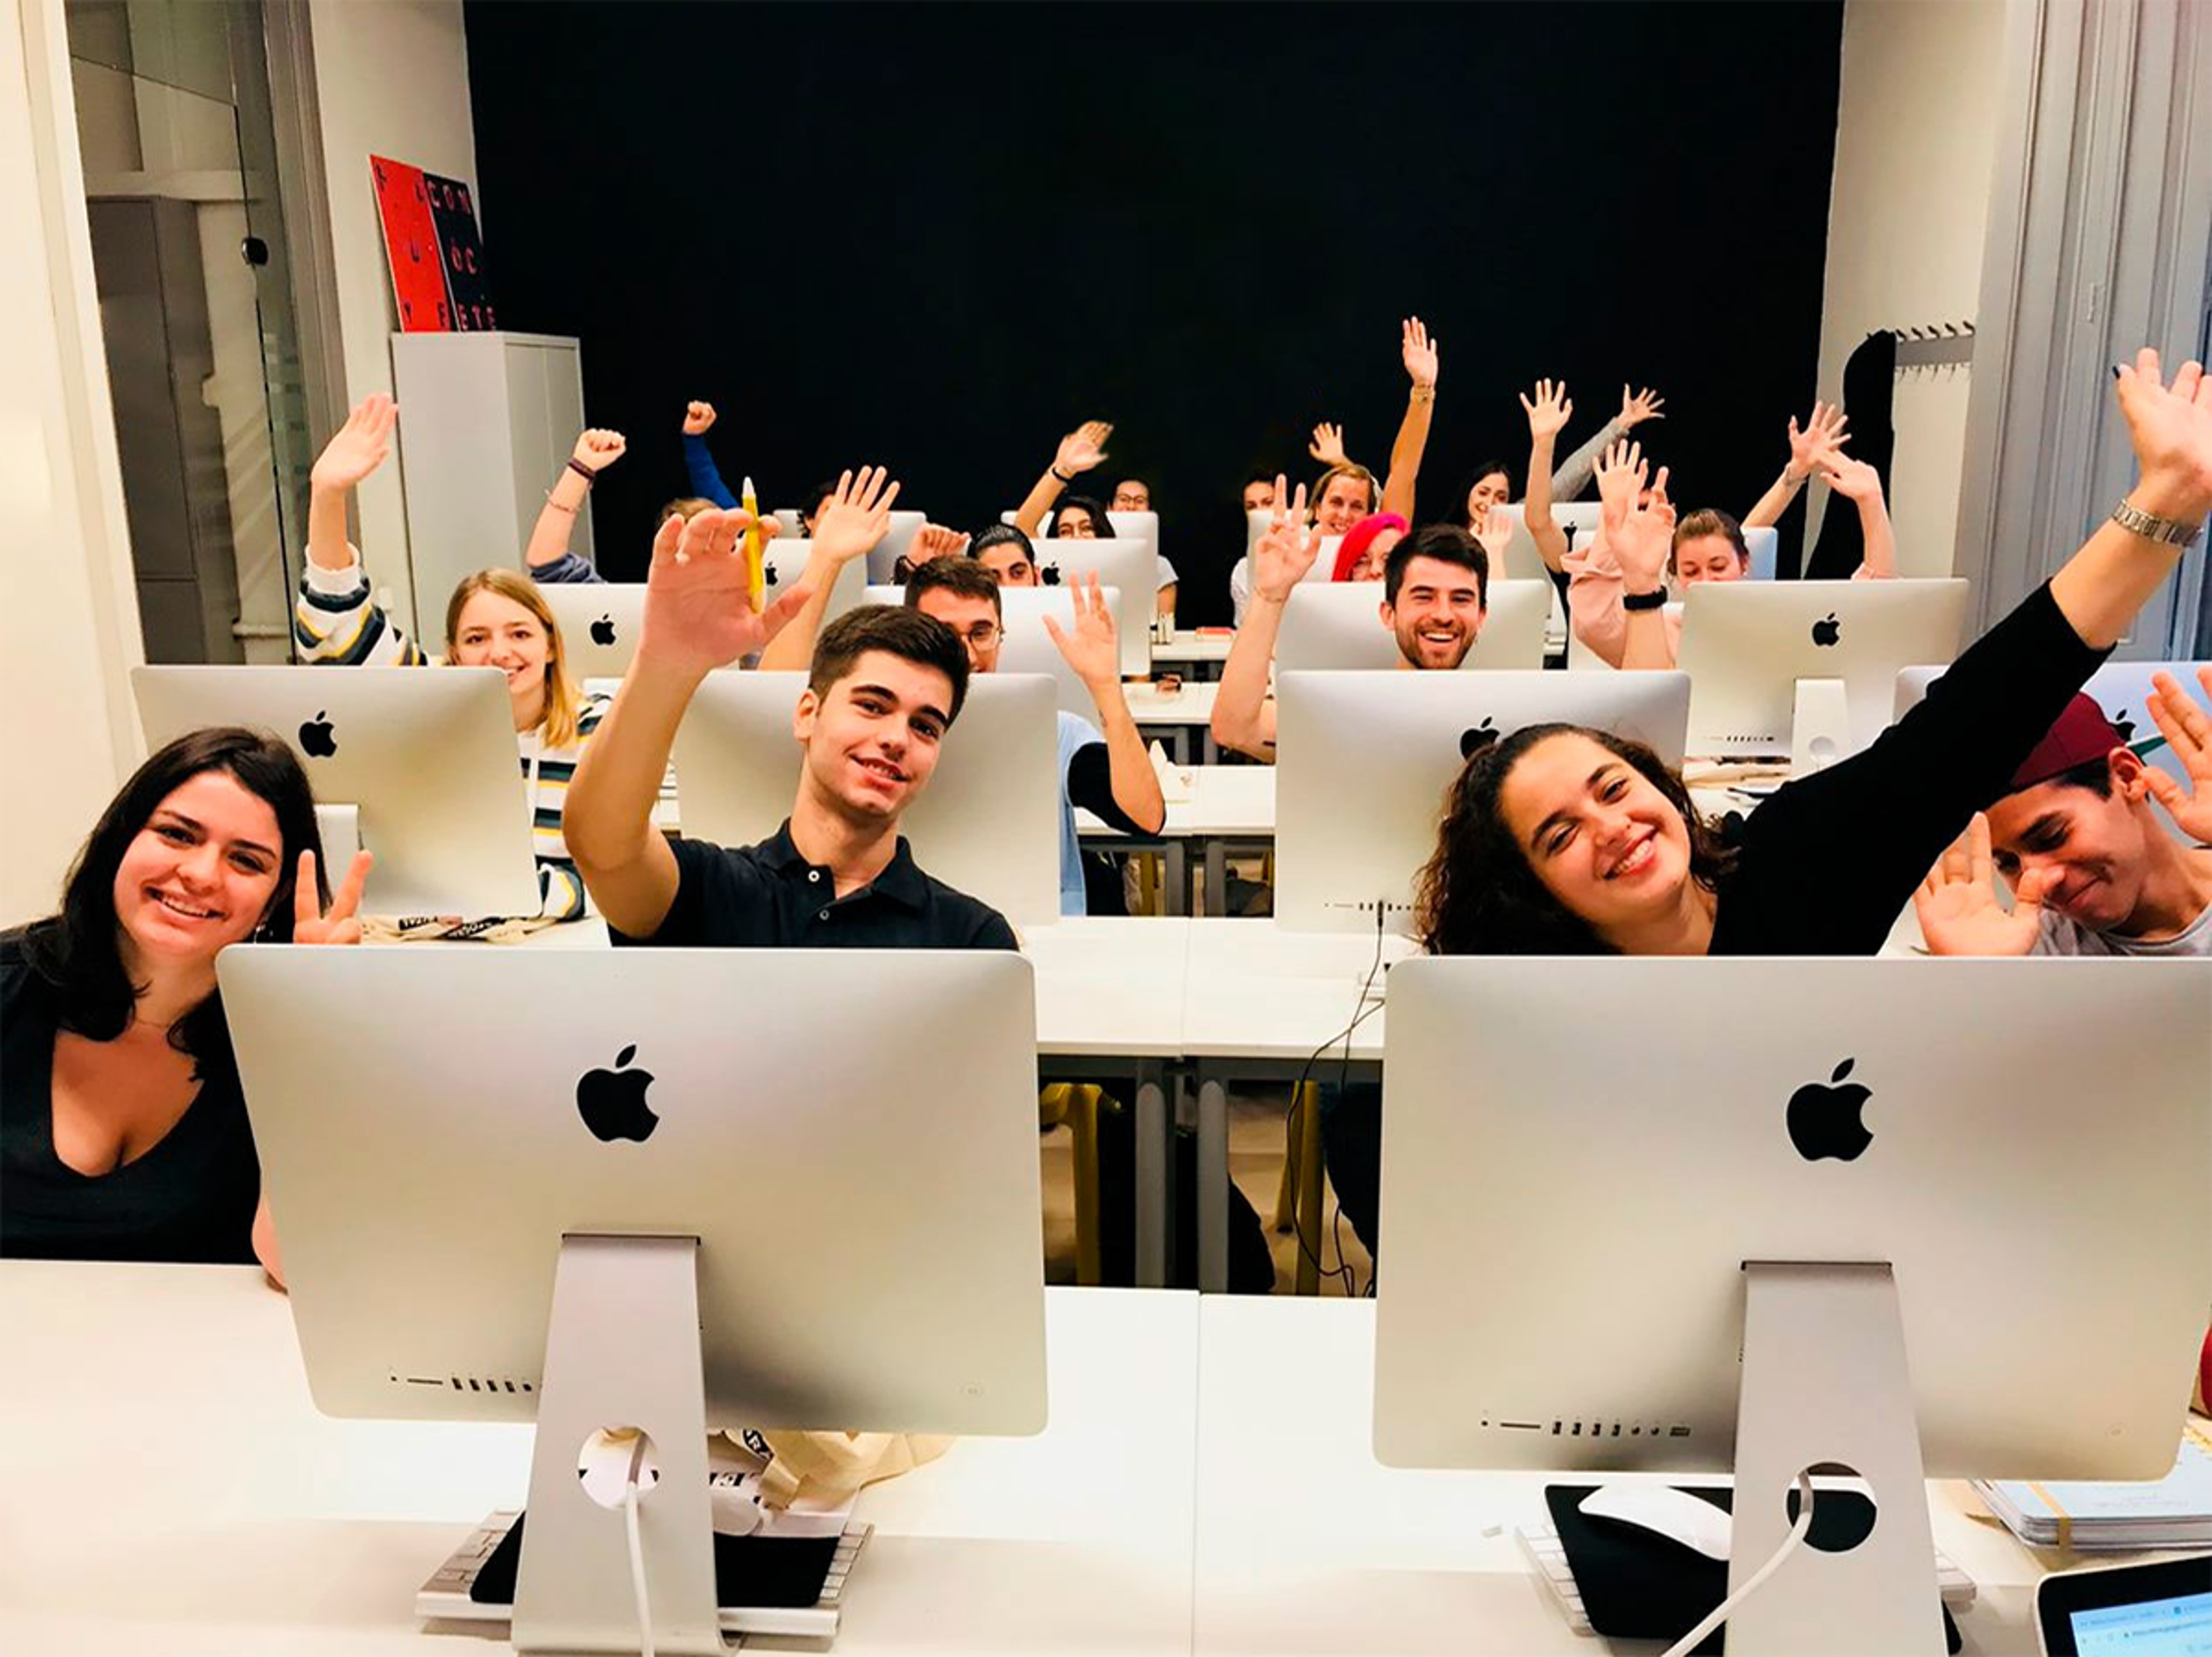 Students waving and smiling behind computer monitors in a modern computer lab, exhibiting enthusiasm and positivity.